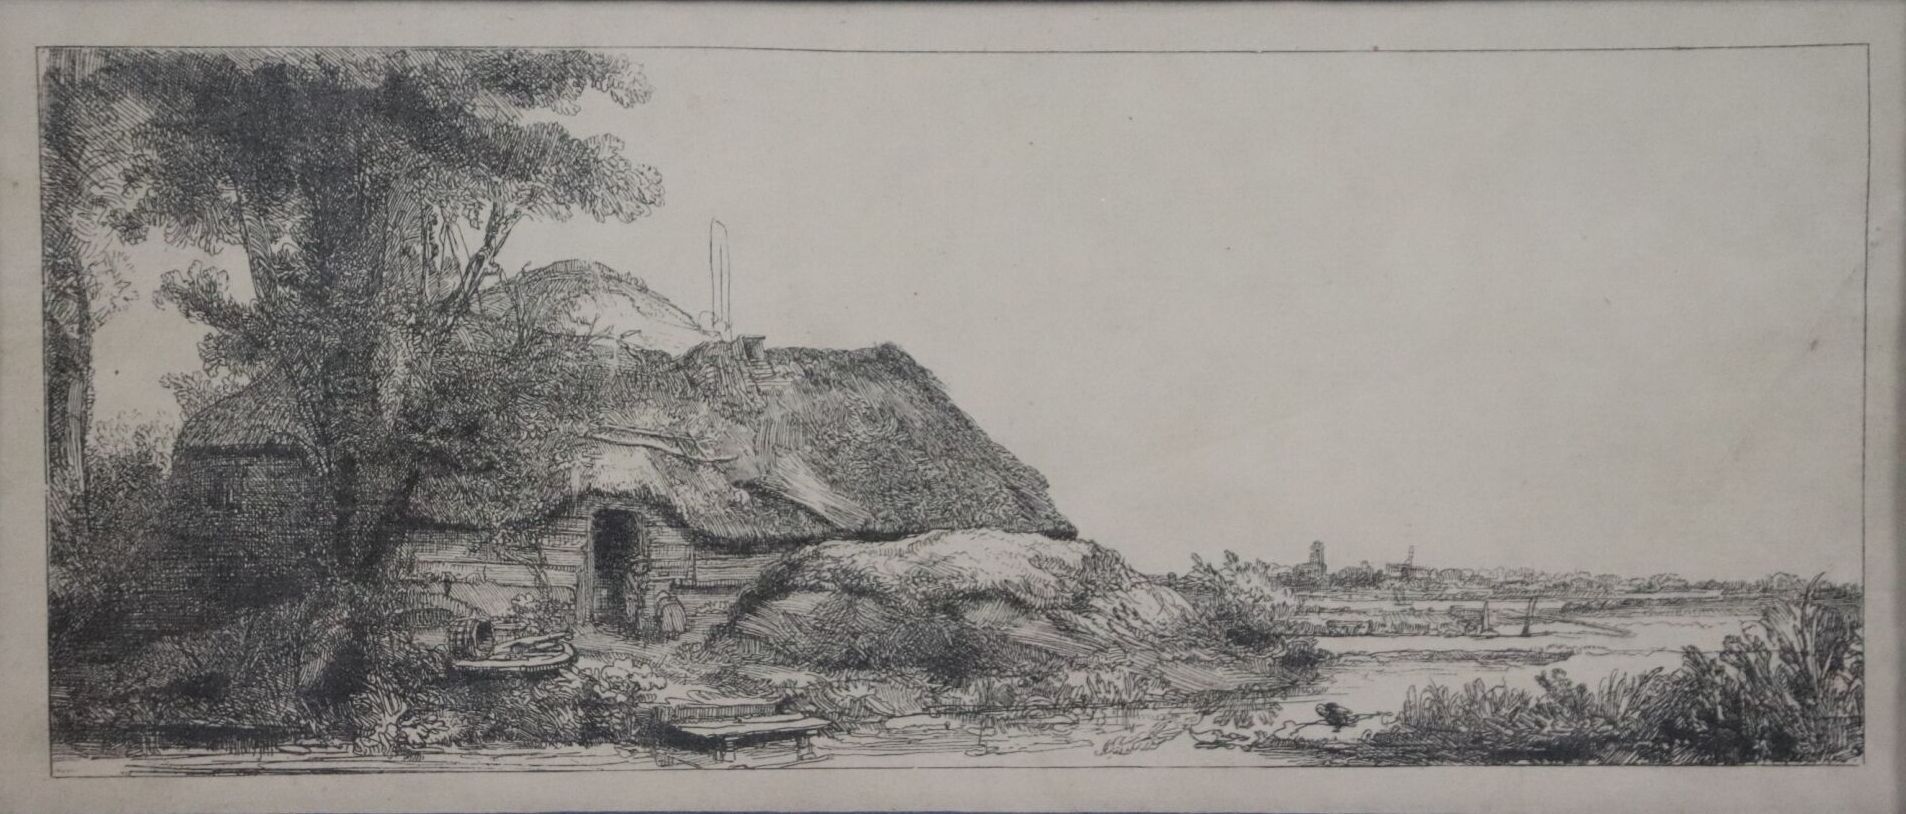 Null REMBRANDT VAN RIJN (1606-1669), after.

The cottage with the big tree.

Pri&hellip;